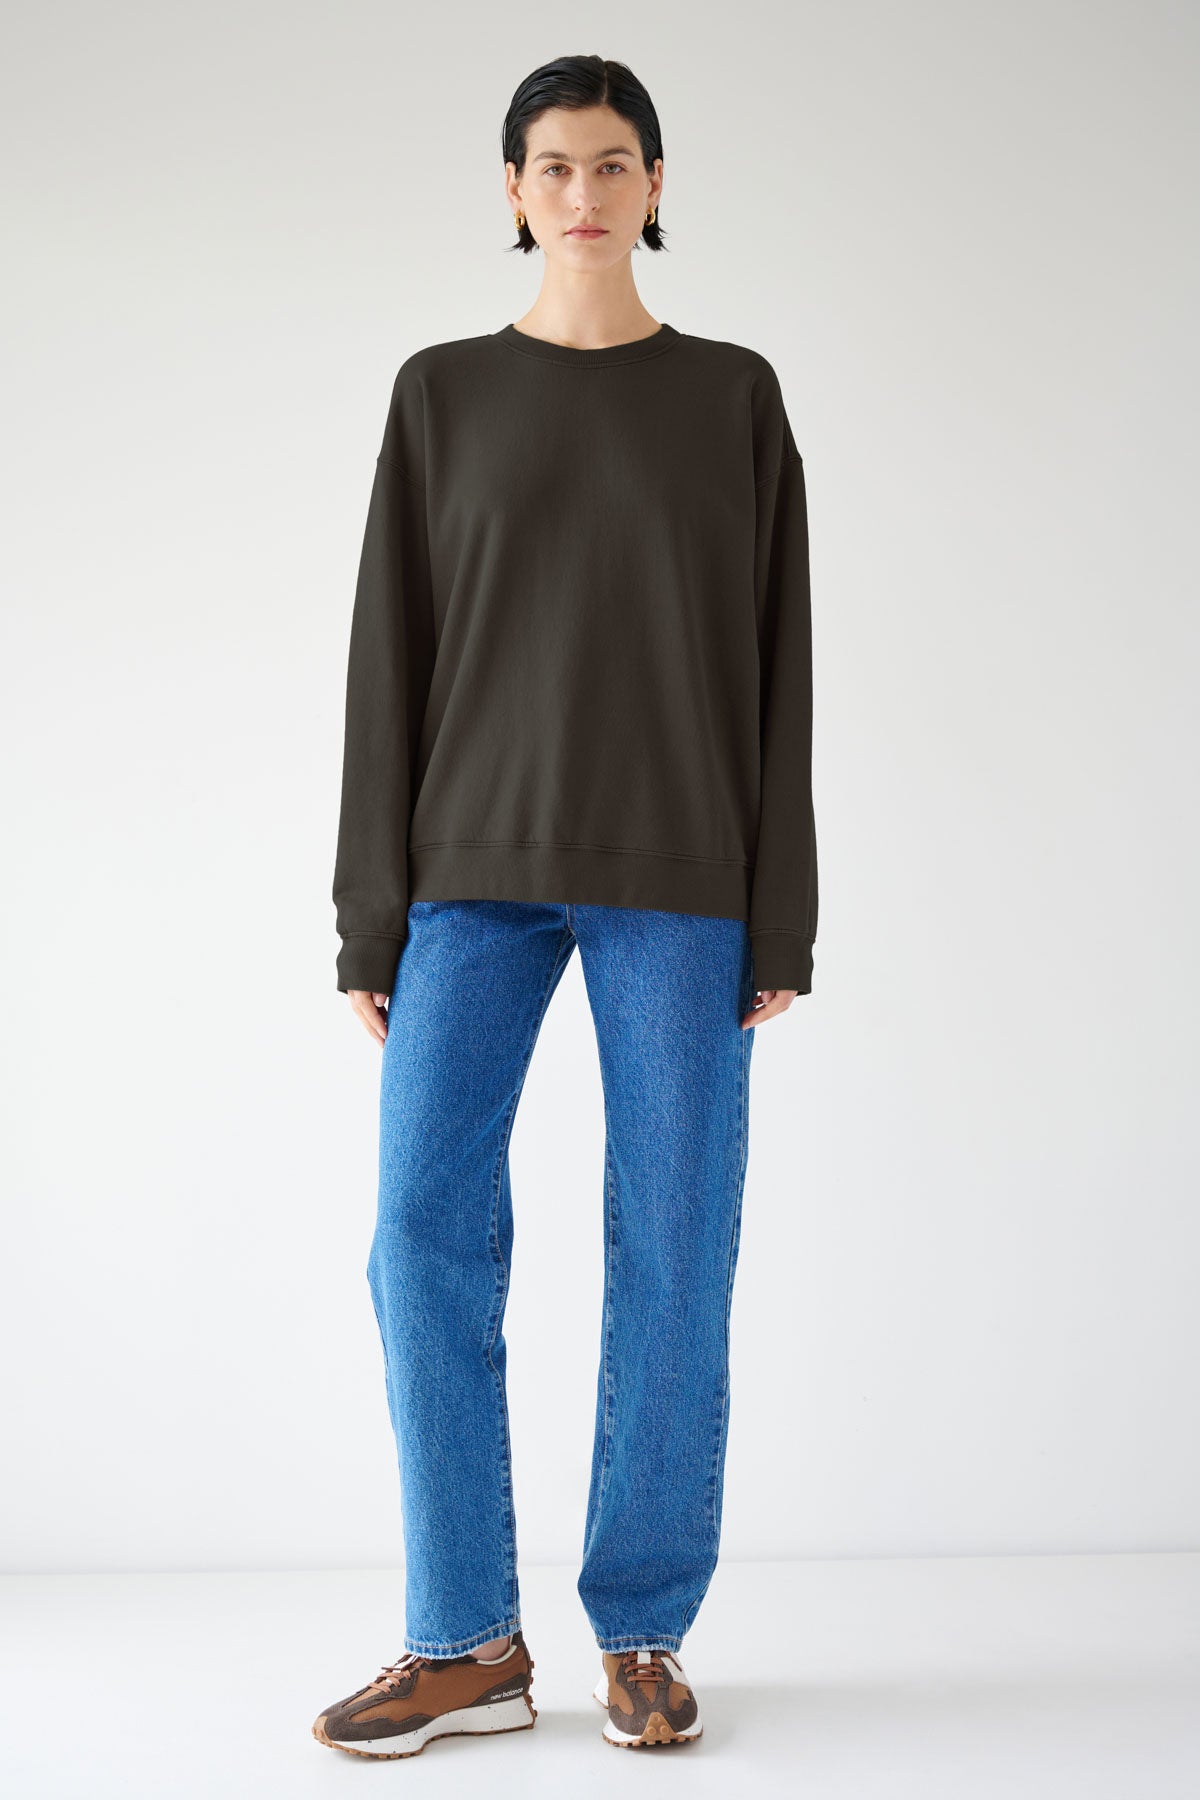   A woman sporting a versatile styling in the Velvet by Jenny Graham Abbot Sweatshirt made of organic cotton. 